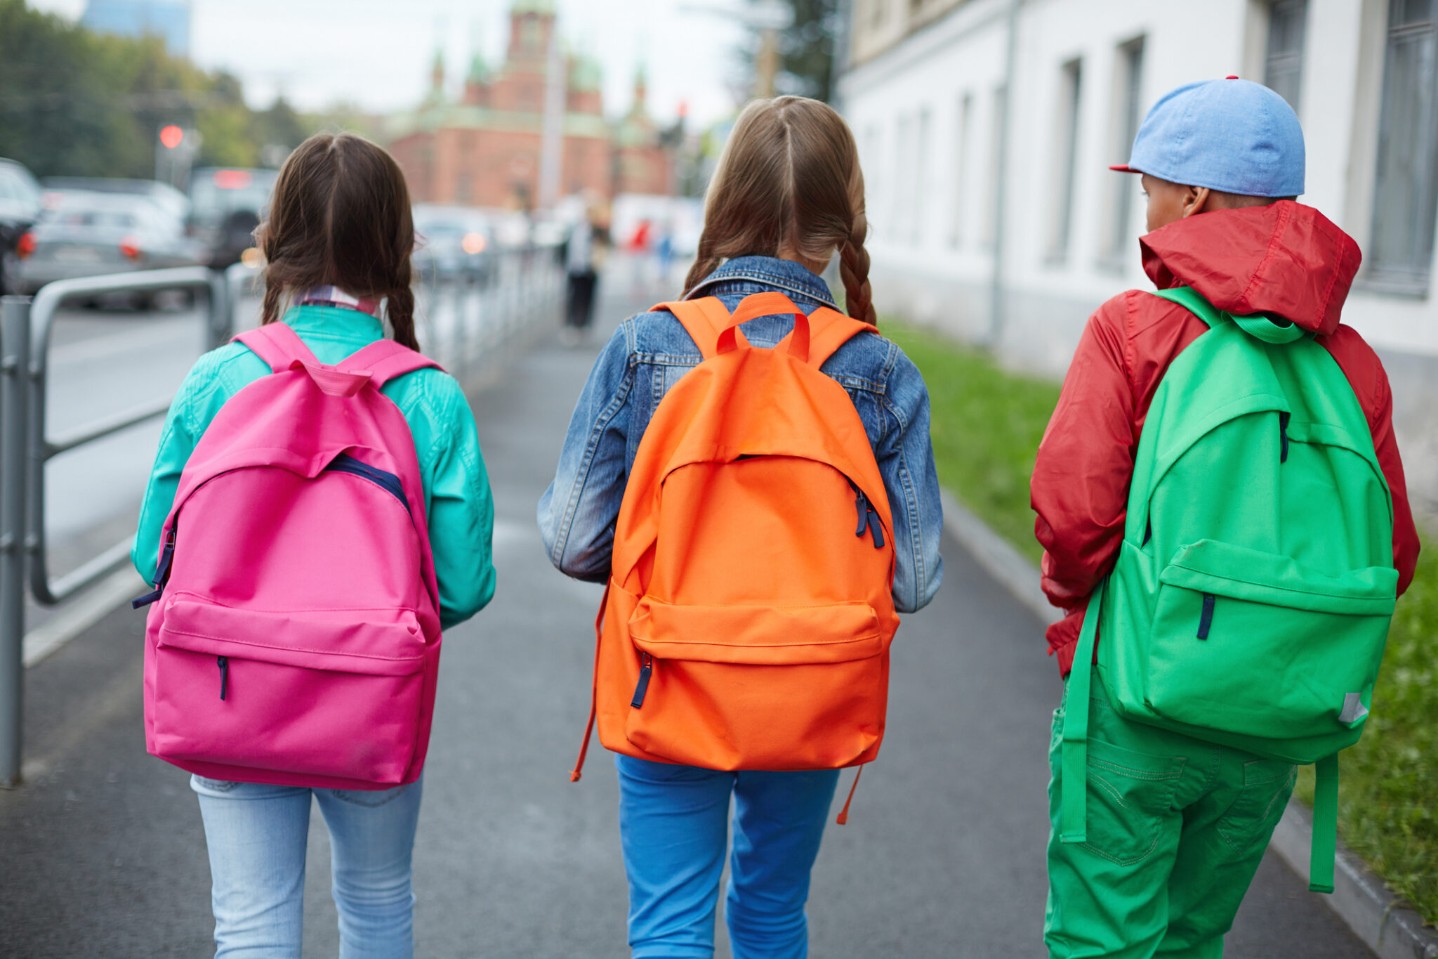 Three children walking down the street, each wearing a brightly colored backpack.